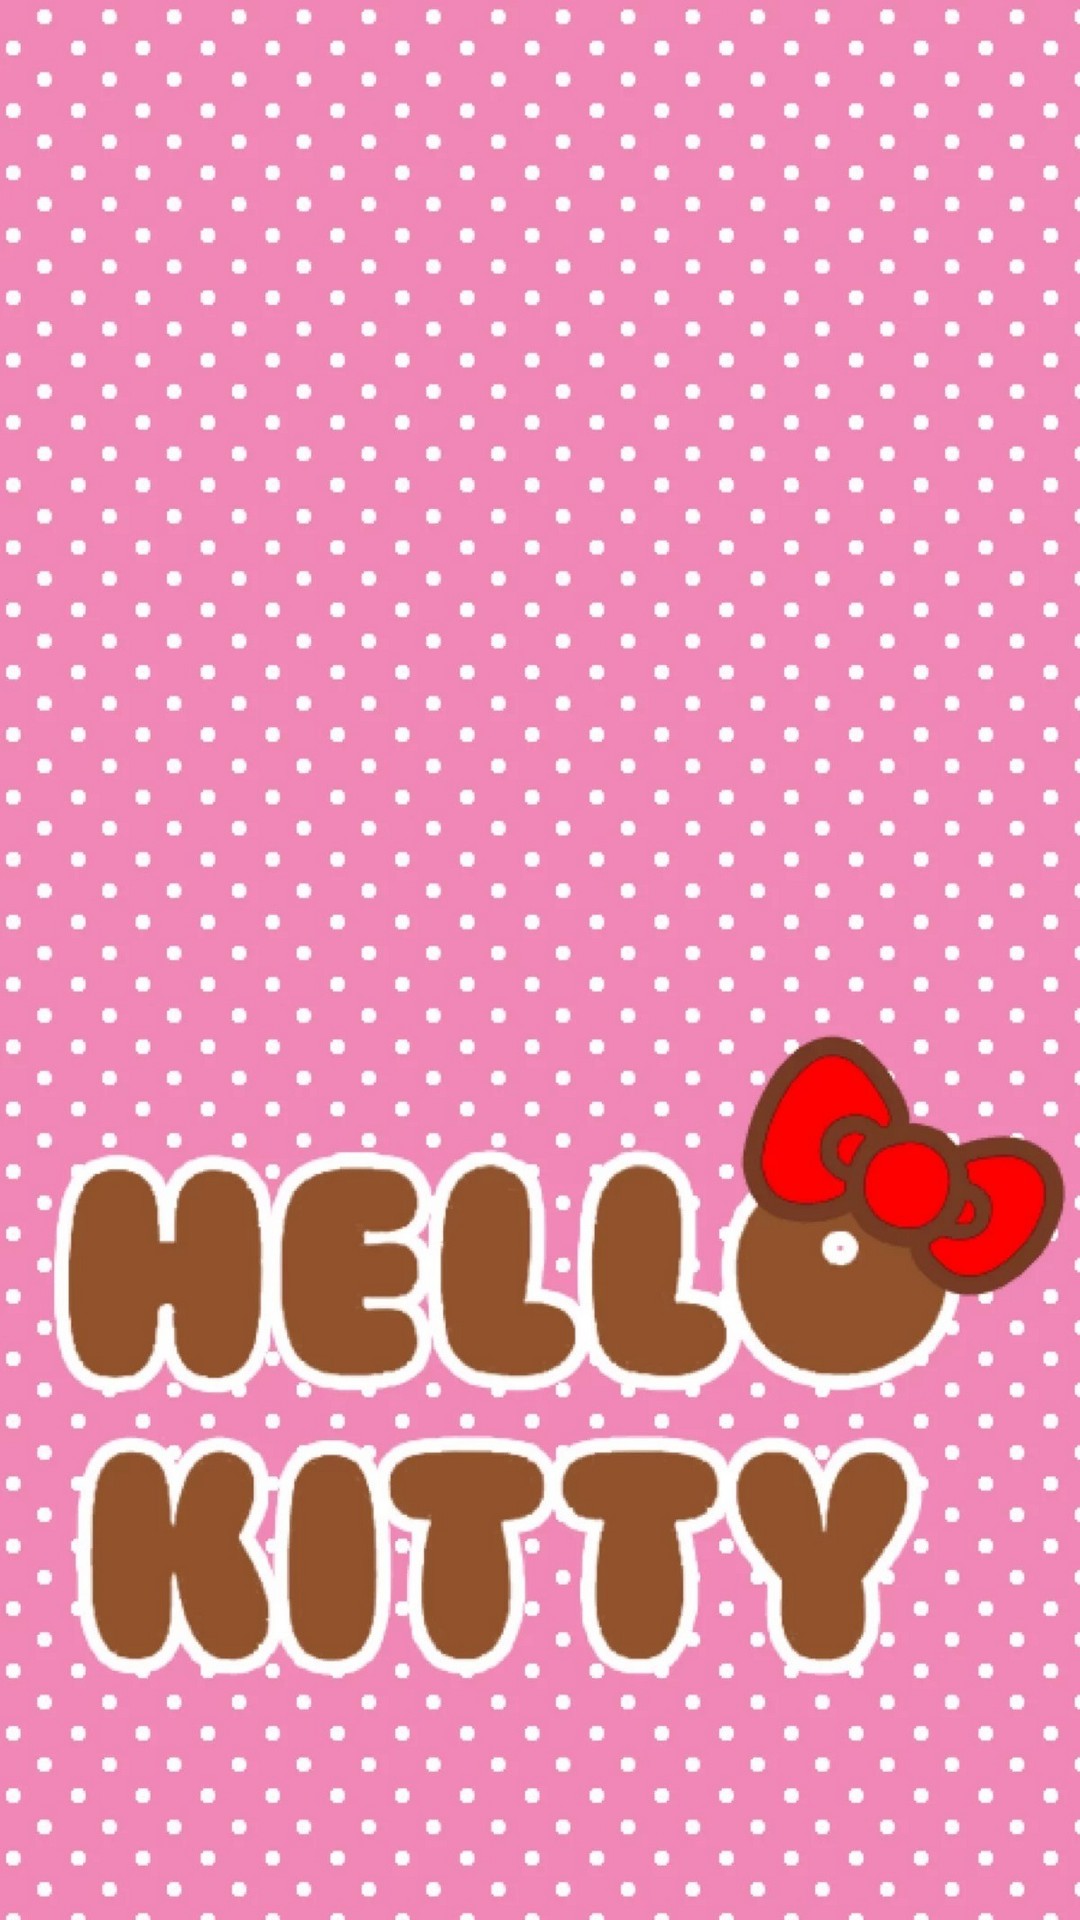 Hello Kitty iPhone 7 Plus Wallpaper with image resolution 1080x1920 pixel. You can use this wallpaper as background for your desktop Computer Screensavers, Android or iPhone smartphones